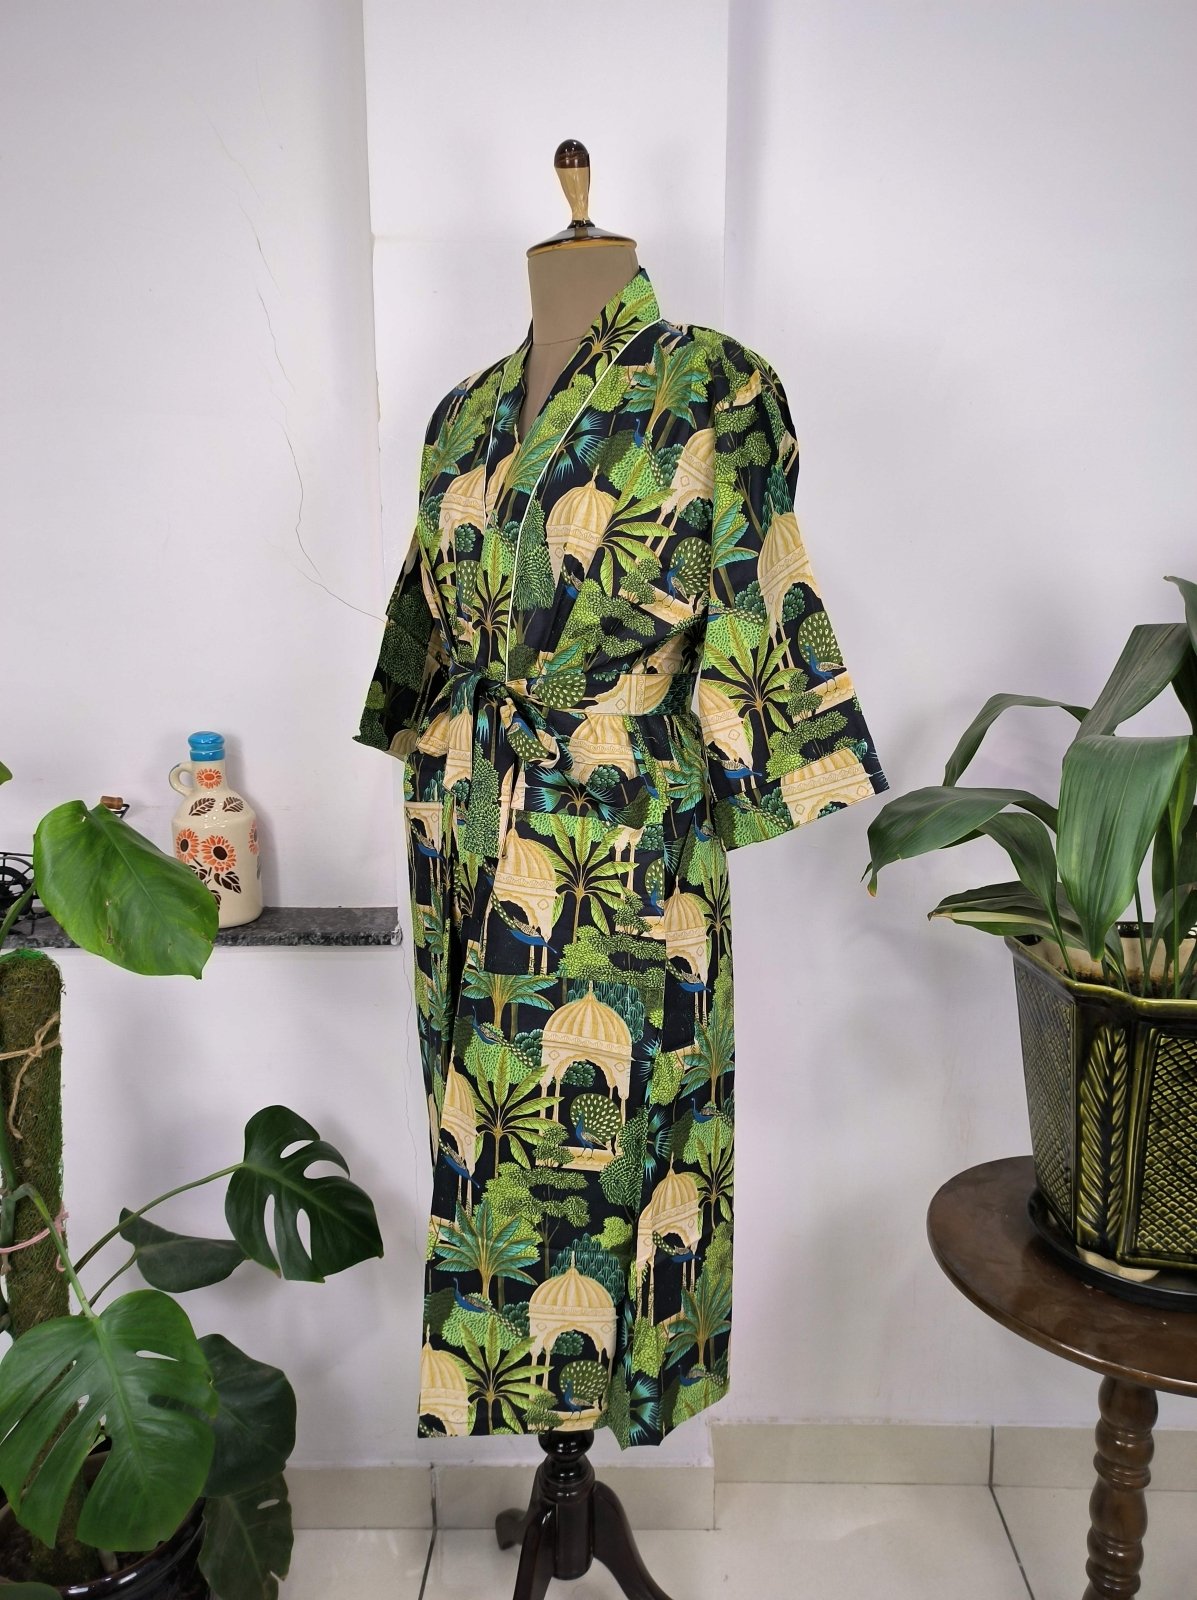 Boho House Robe Indian Handprinted Cotton Kimono Peacock Bird Print | Perfect for Summer Luxury Beach Holidays Yacht Cover Up Stunning Dress - The Eastern Loom